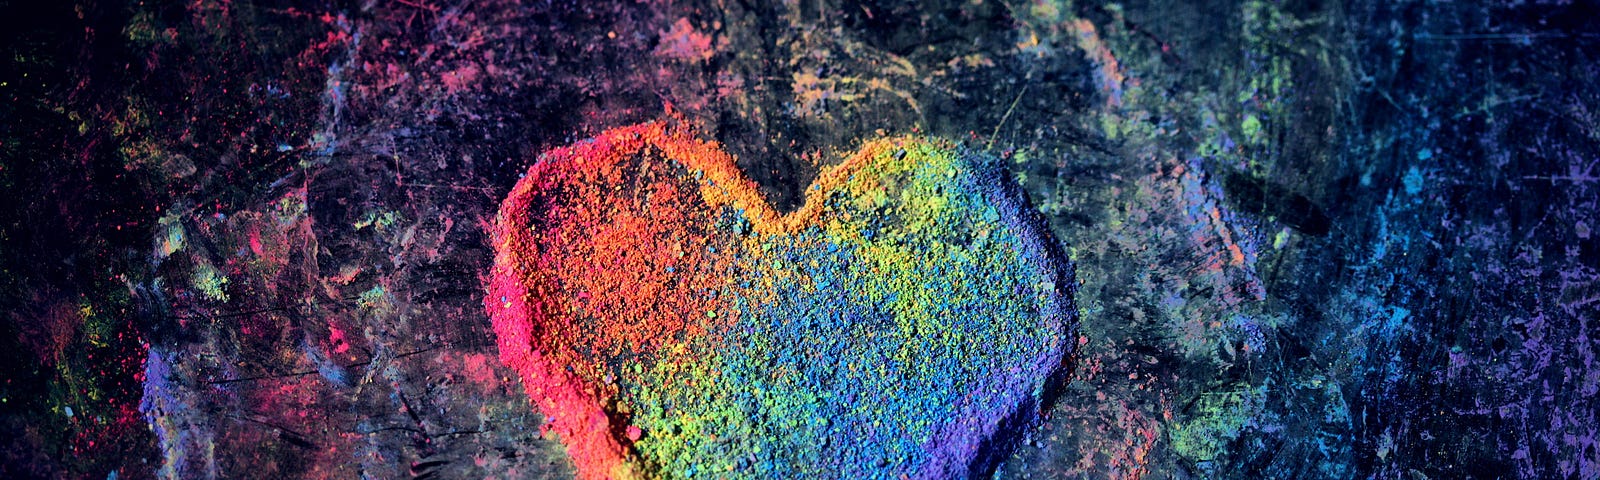 Image of a rainbow-colored heart drawn in chalk powder on a chalk- and paint-splashed surface.